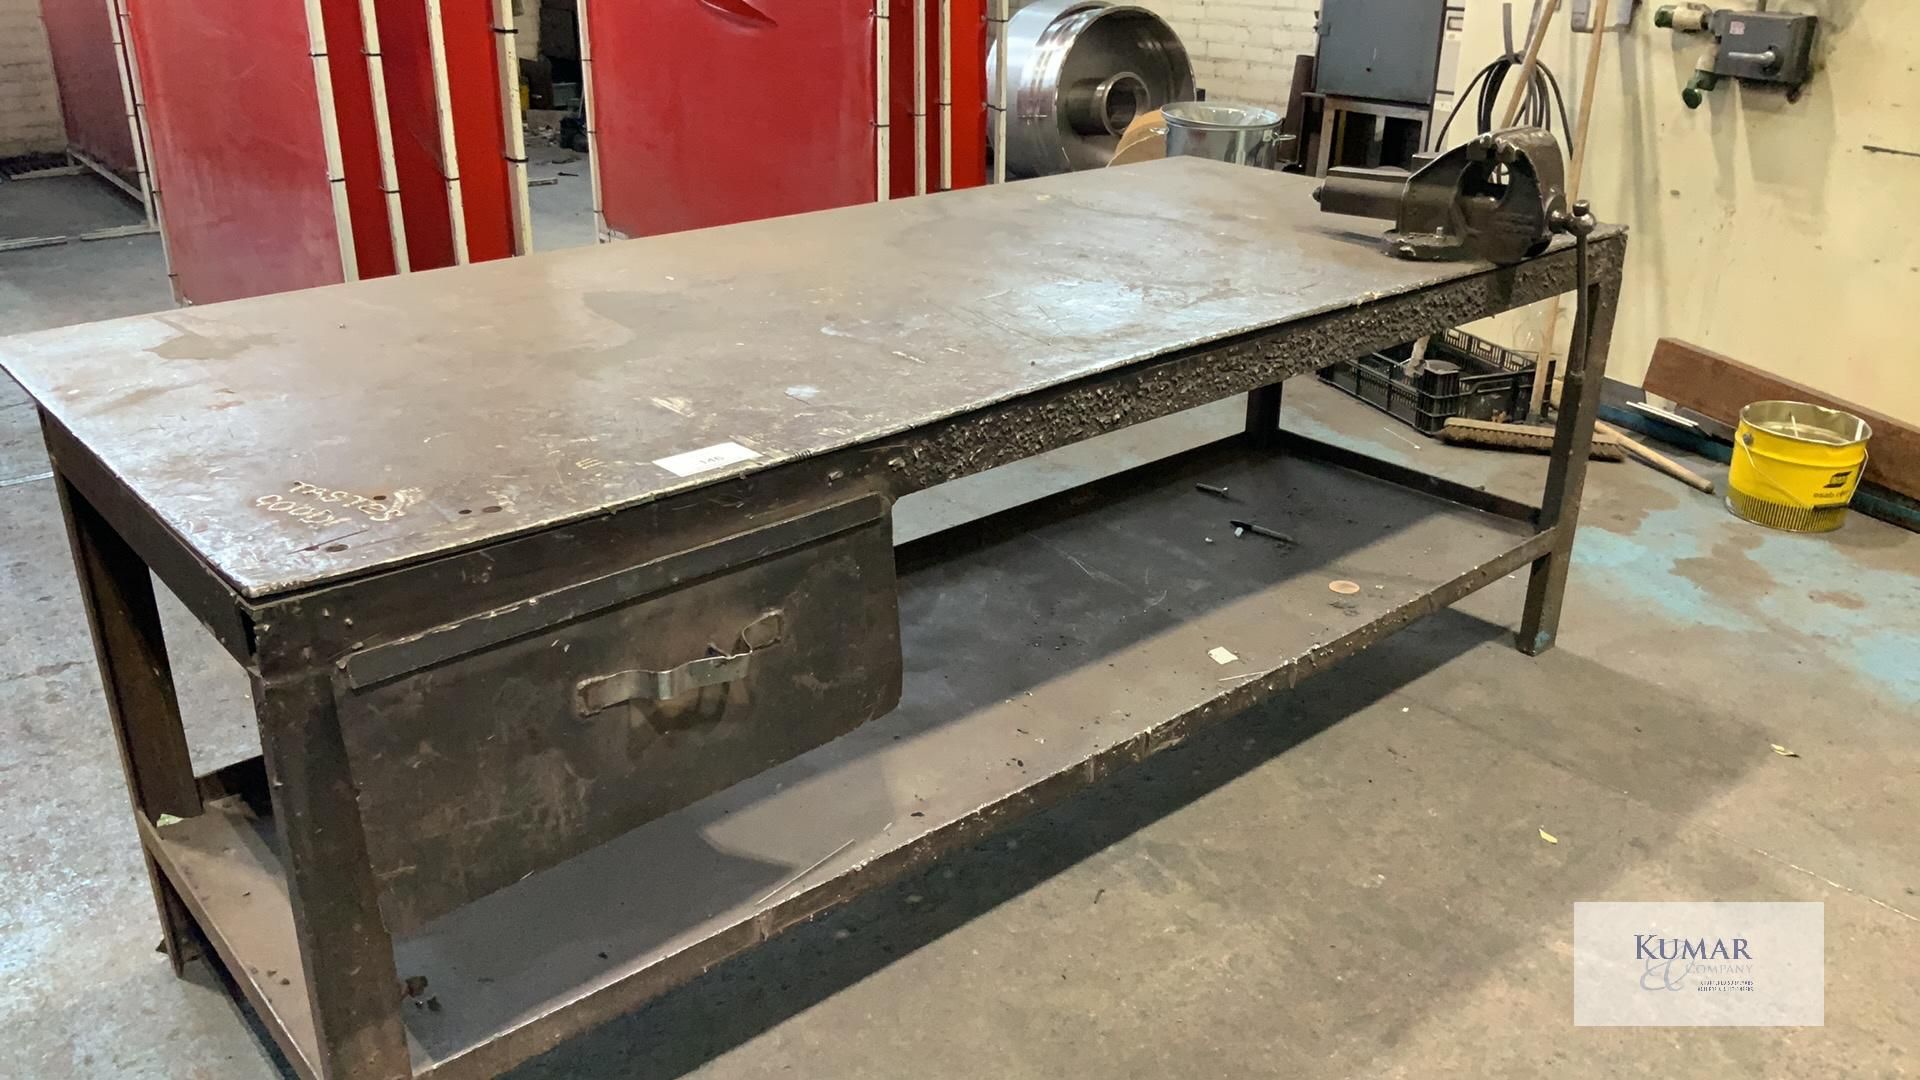 Welded Mild Steel Work Bench with Vice - Dimensions 244cm x 107cm x 85cm Height - Please Note Does - Image 2 of 5